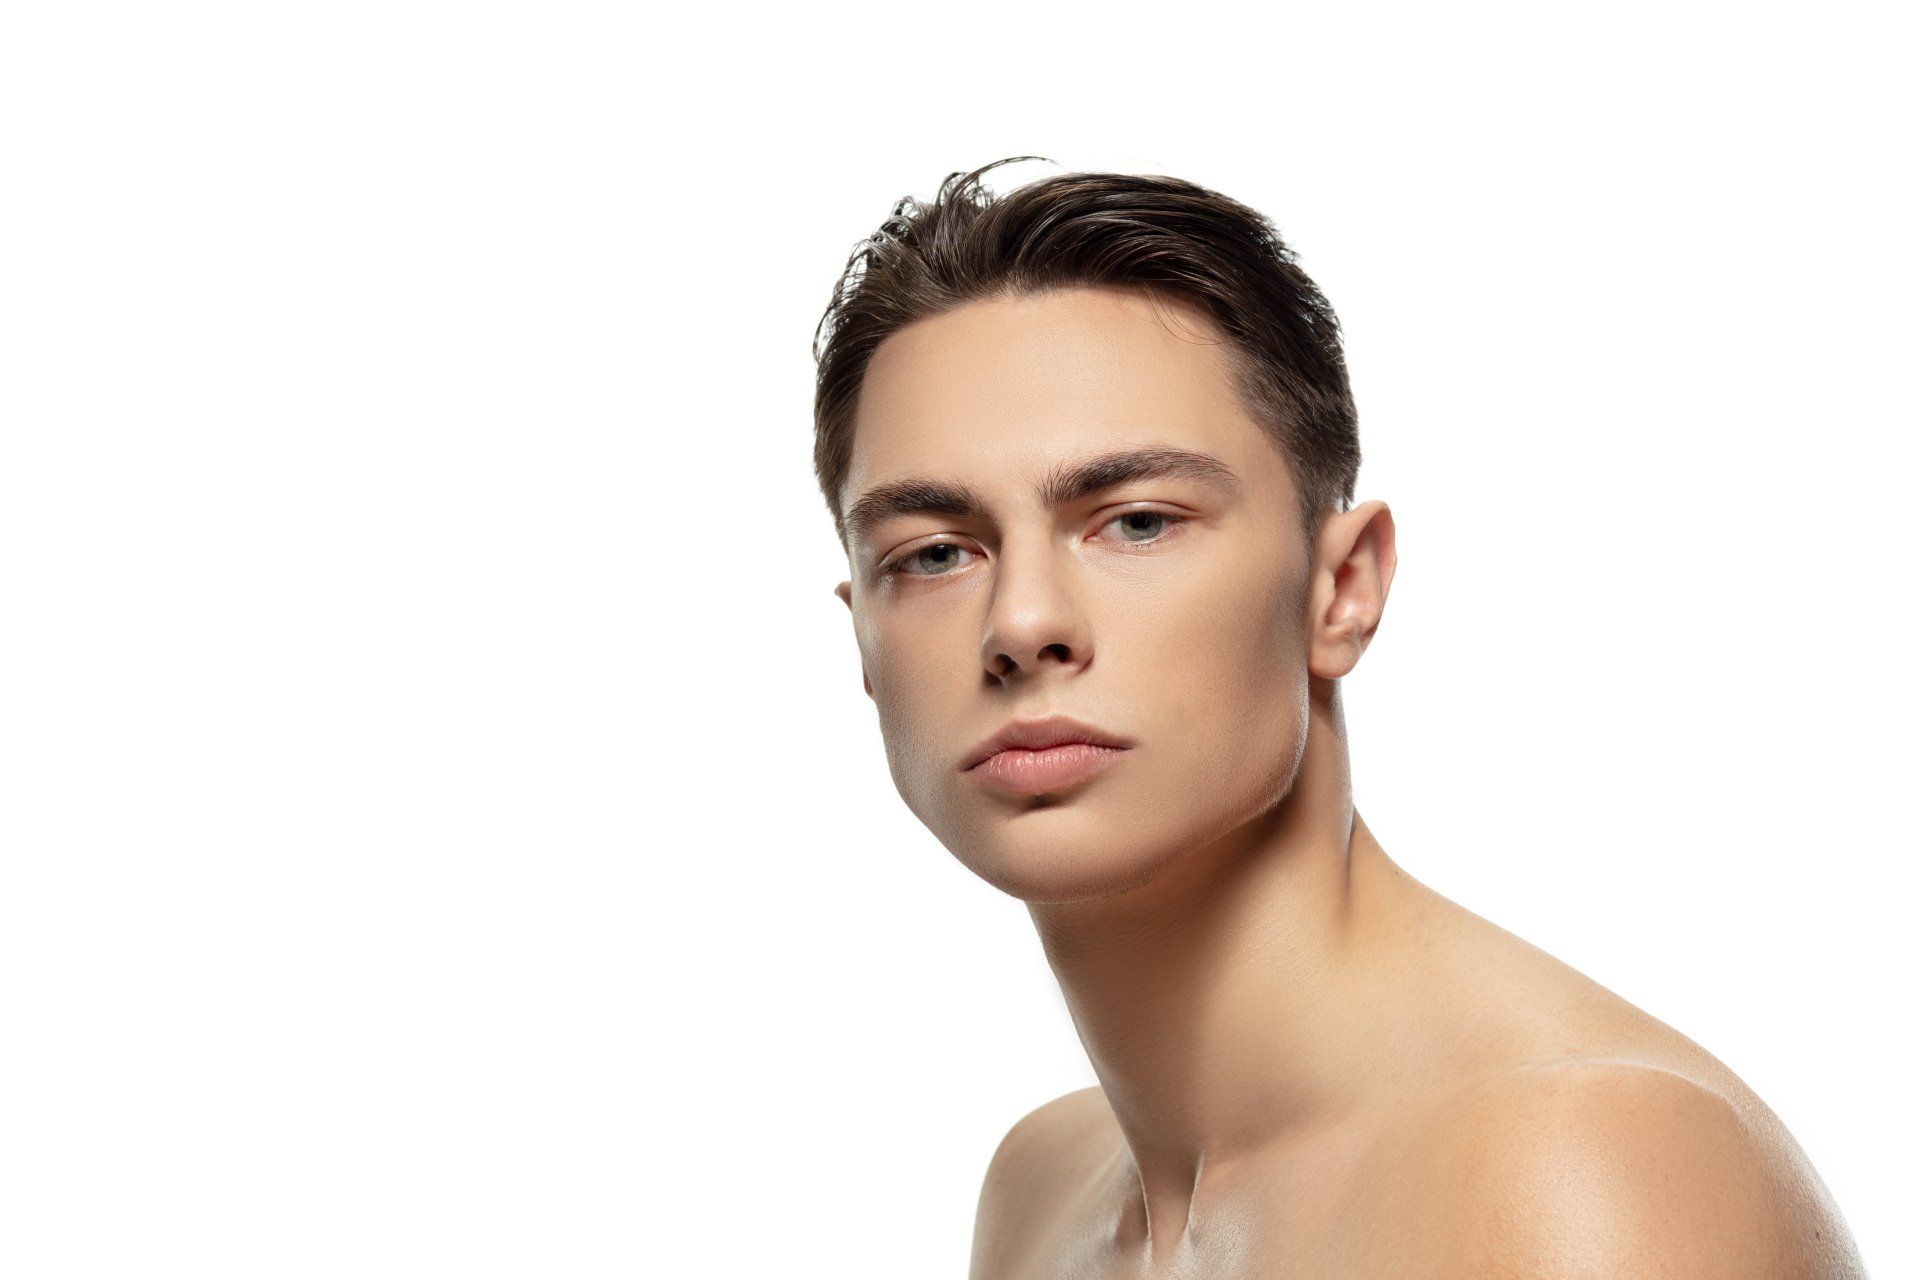 Facial masculinization surgery in Beverly Hills